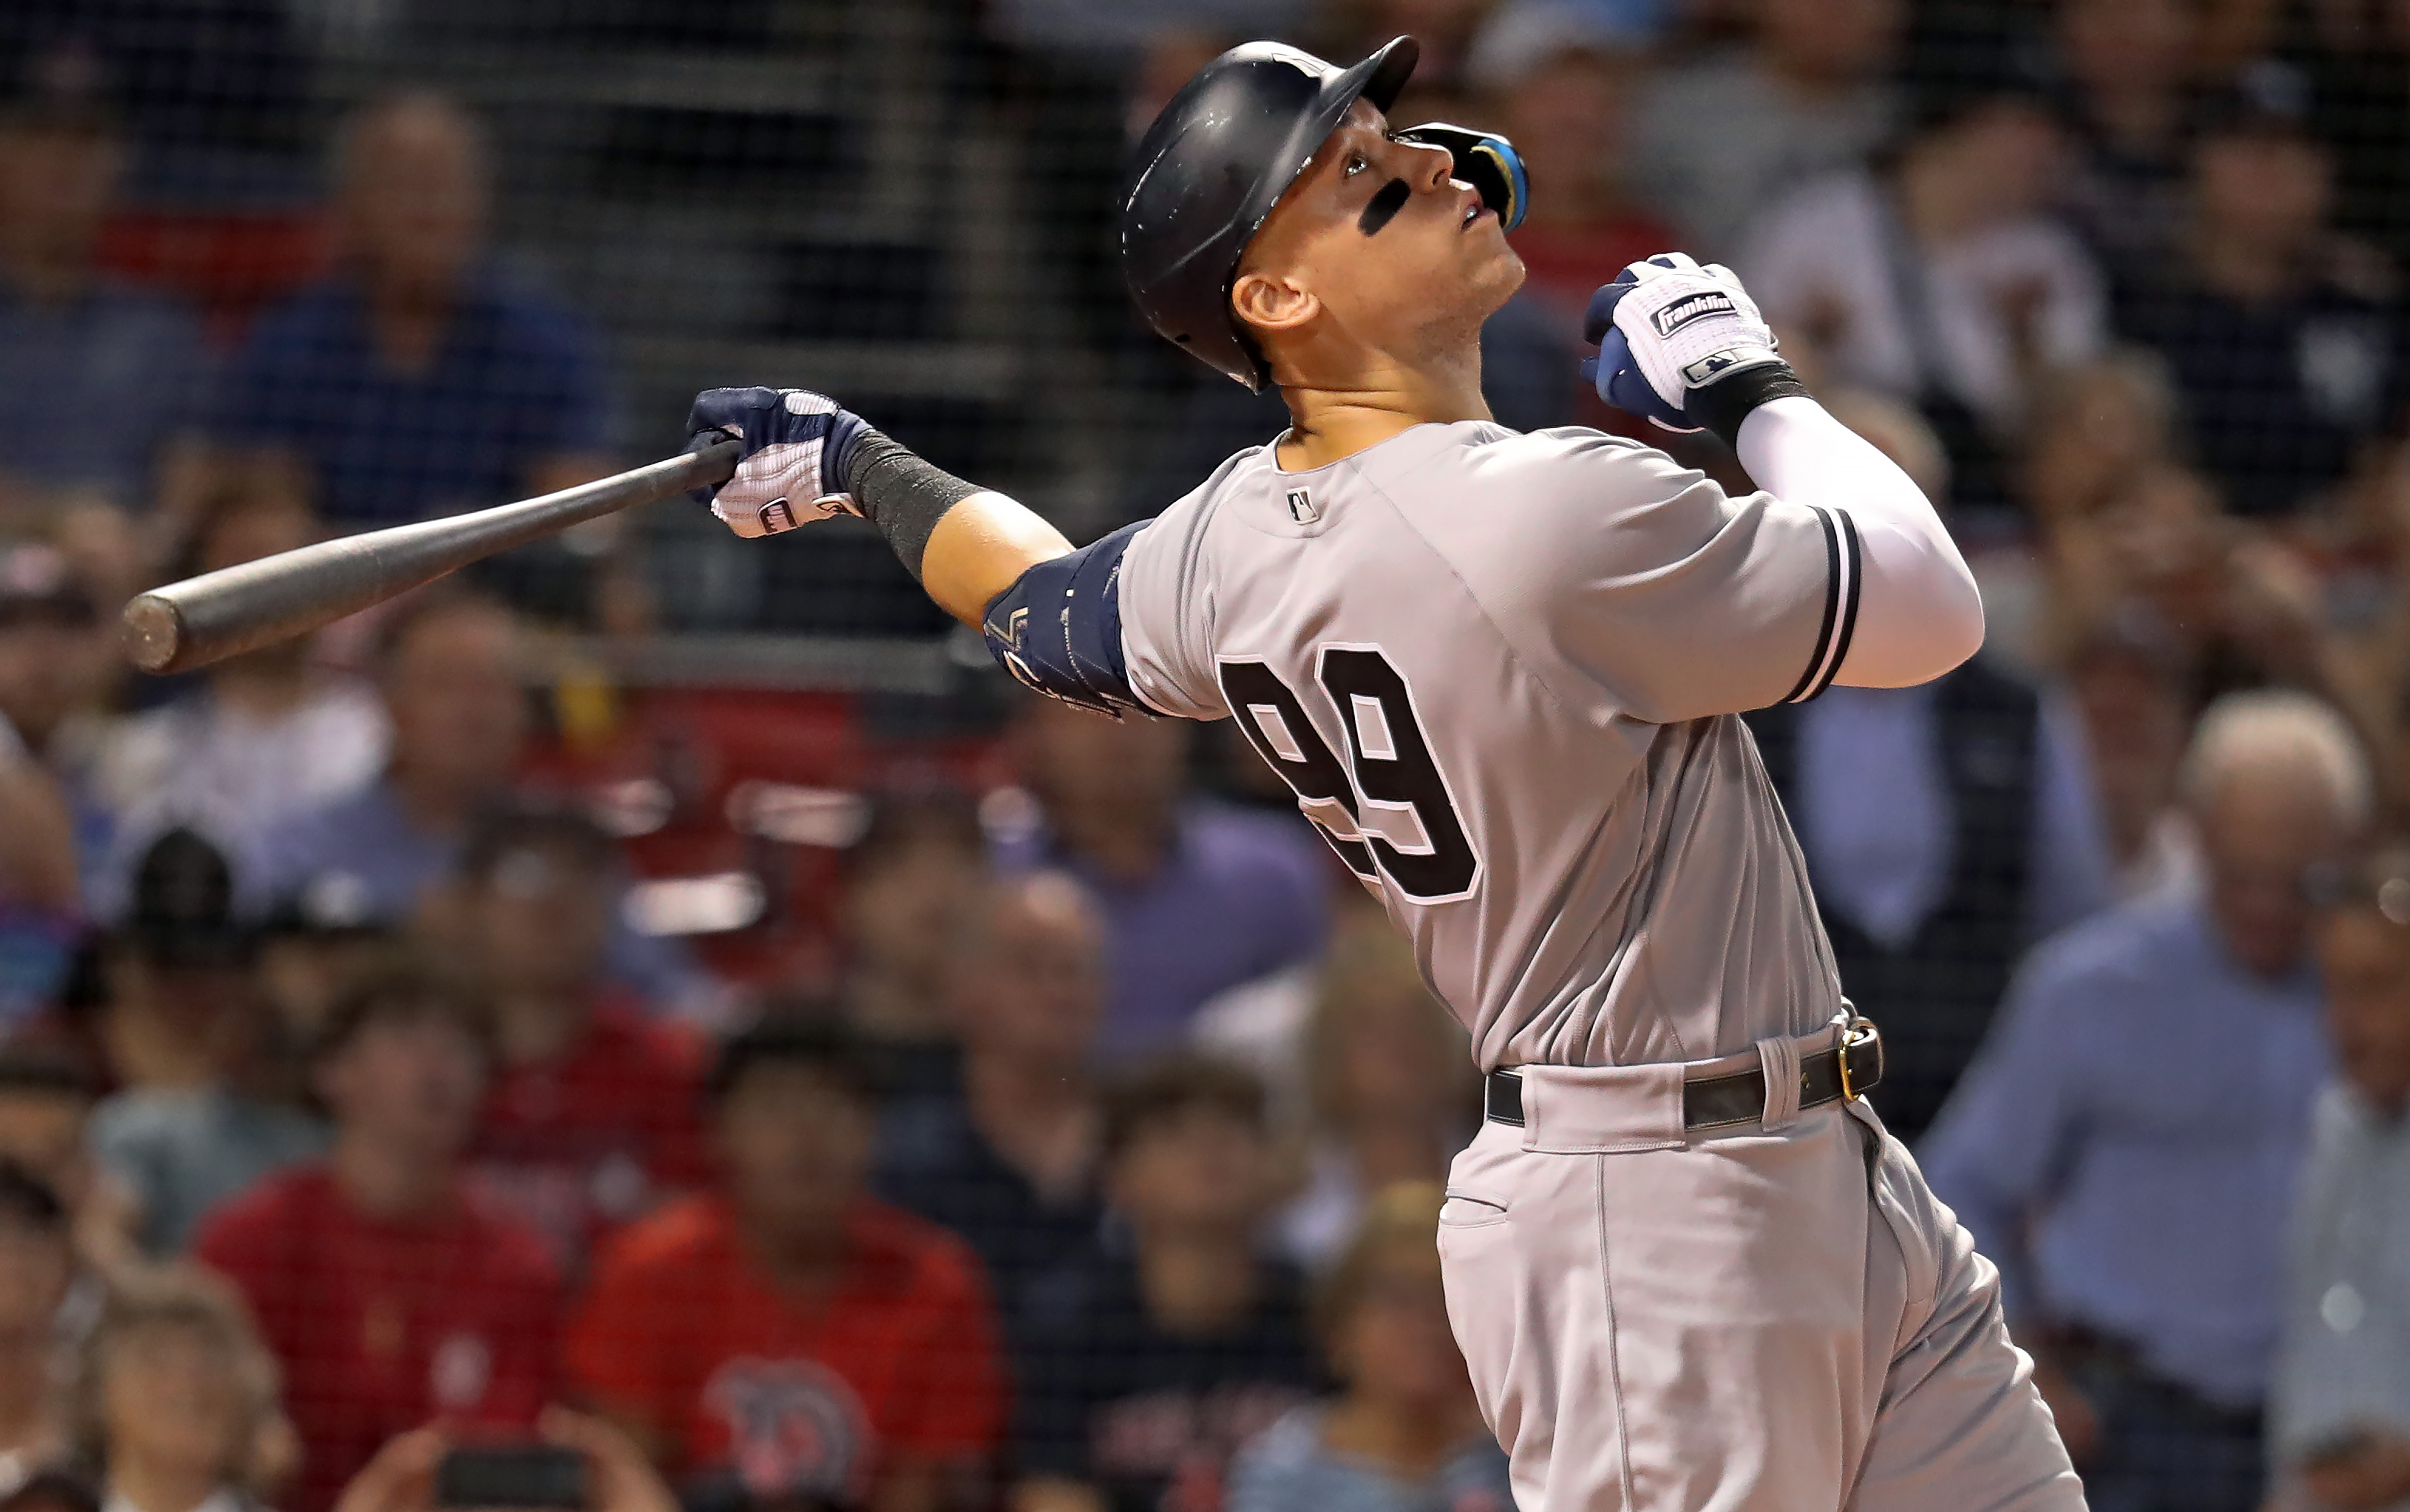 He's perfect for this': Aaron Judge is at 57 home runs and